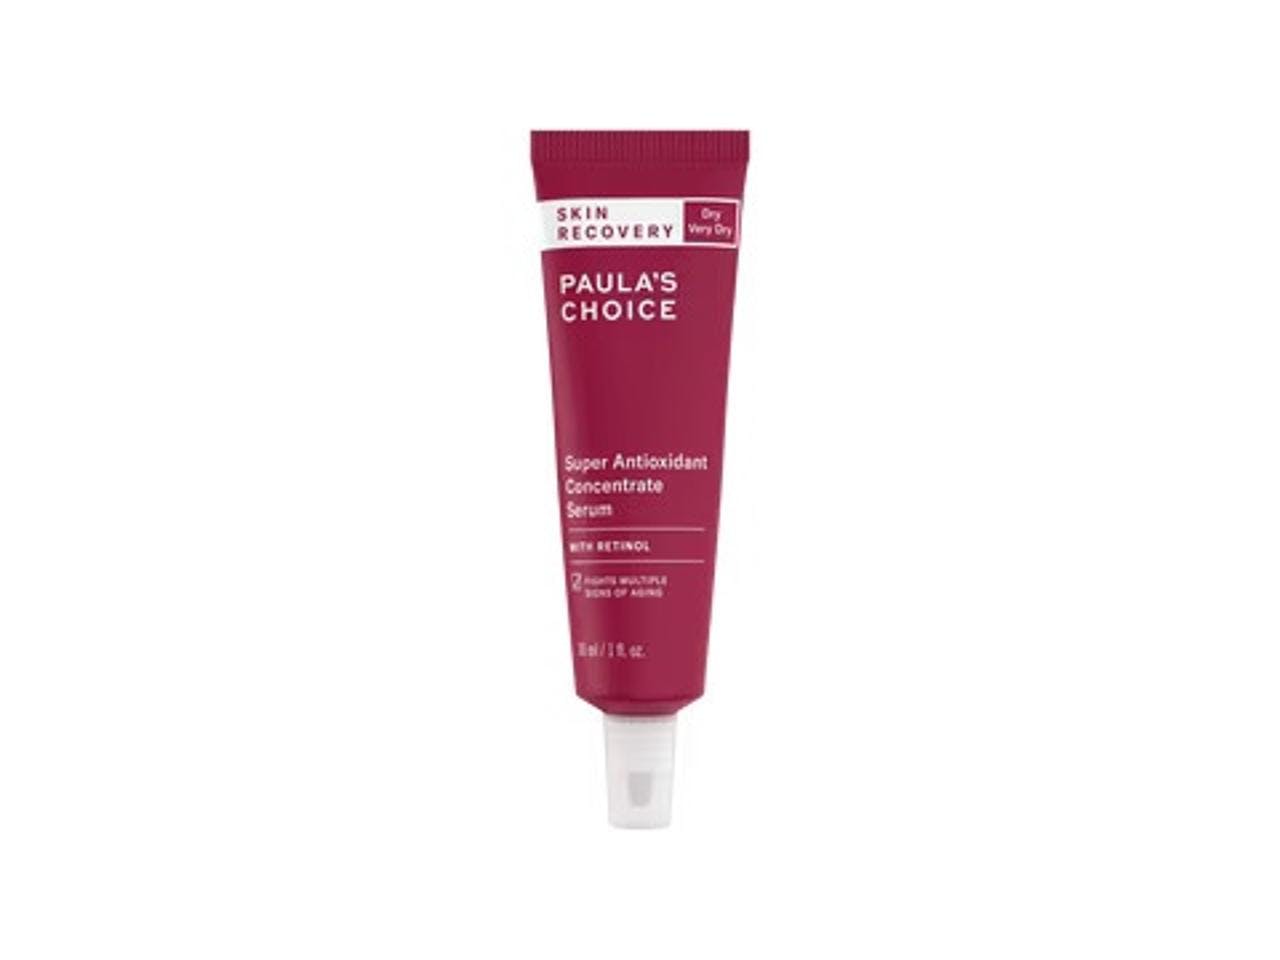 Paula's Choice Skin Recovery Super Antioxidant Concentrate Serum With Retinol